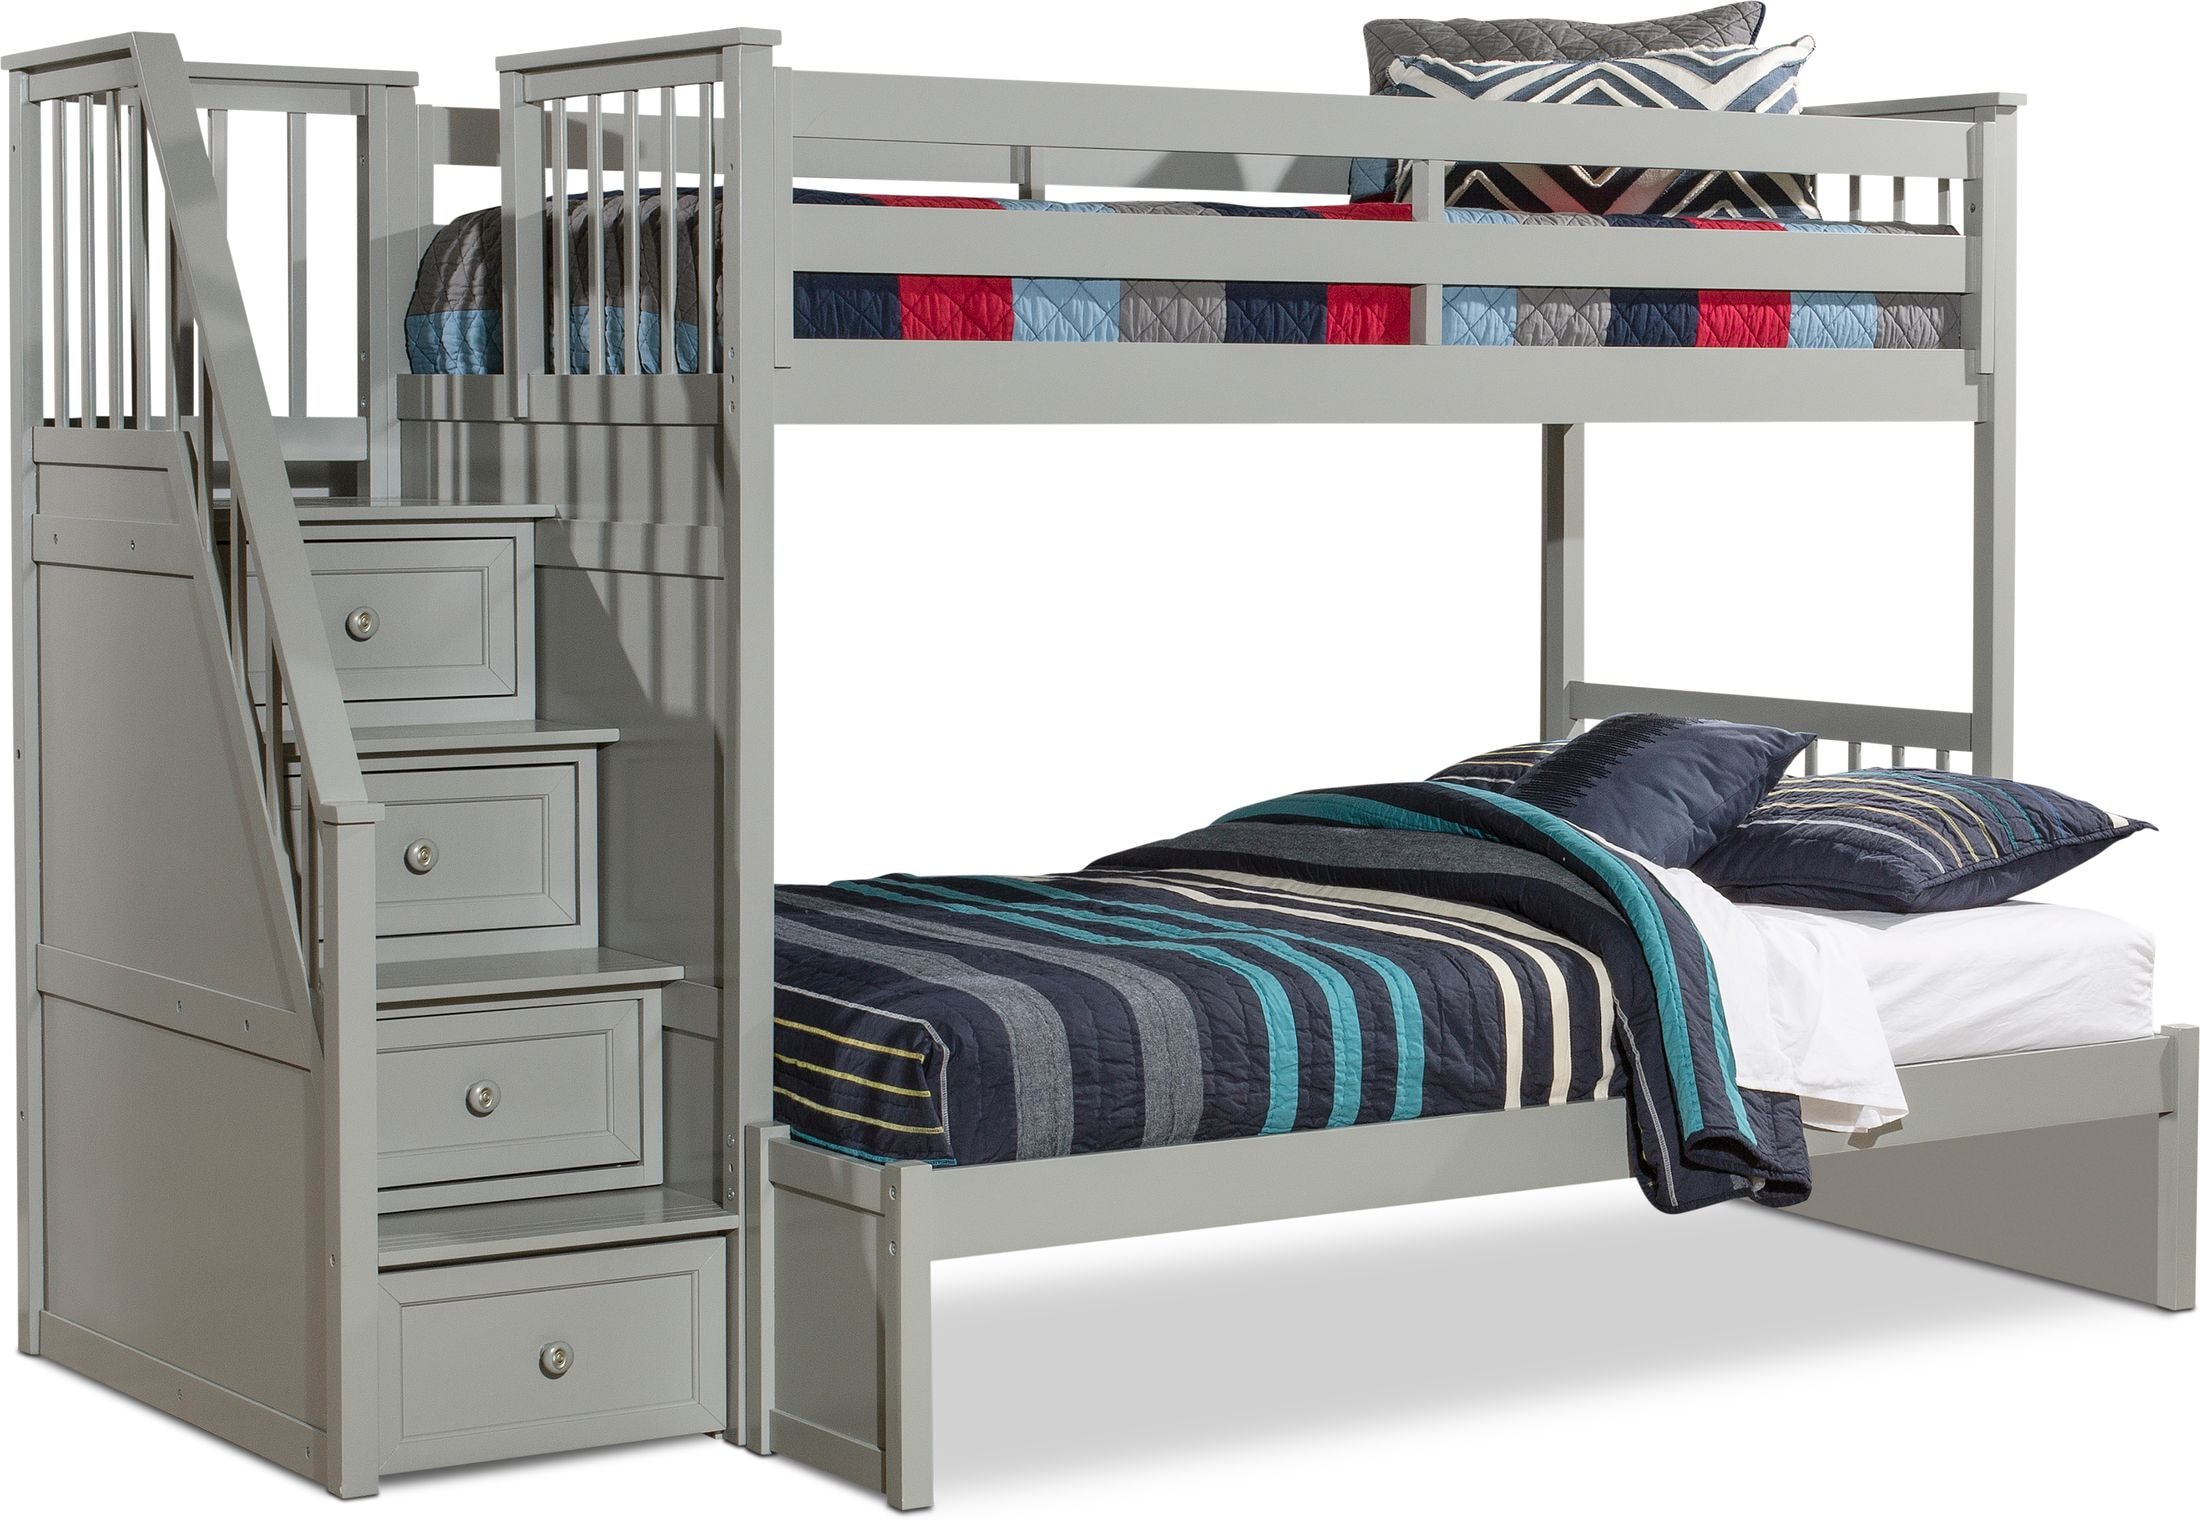 Undefined Value City Furniture, Captain Full Bunk Beds